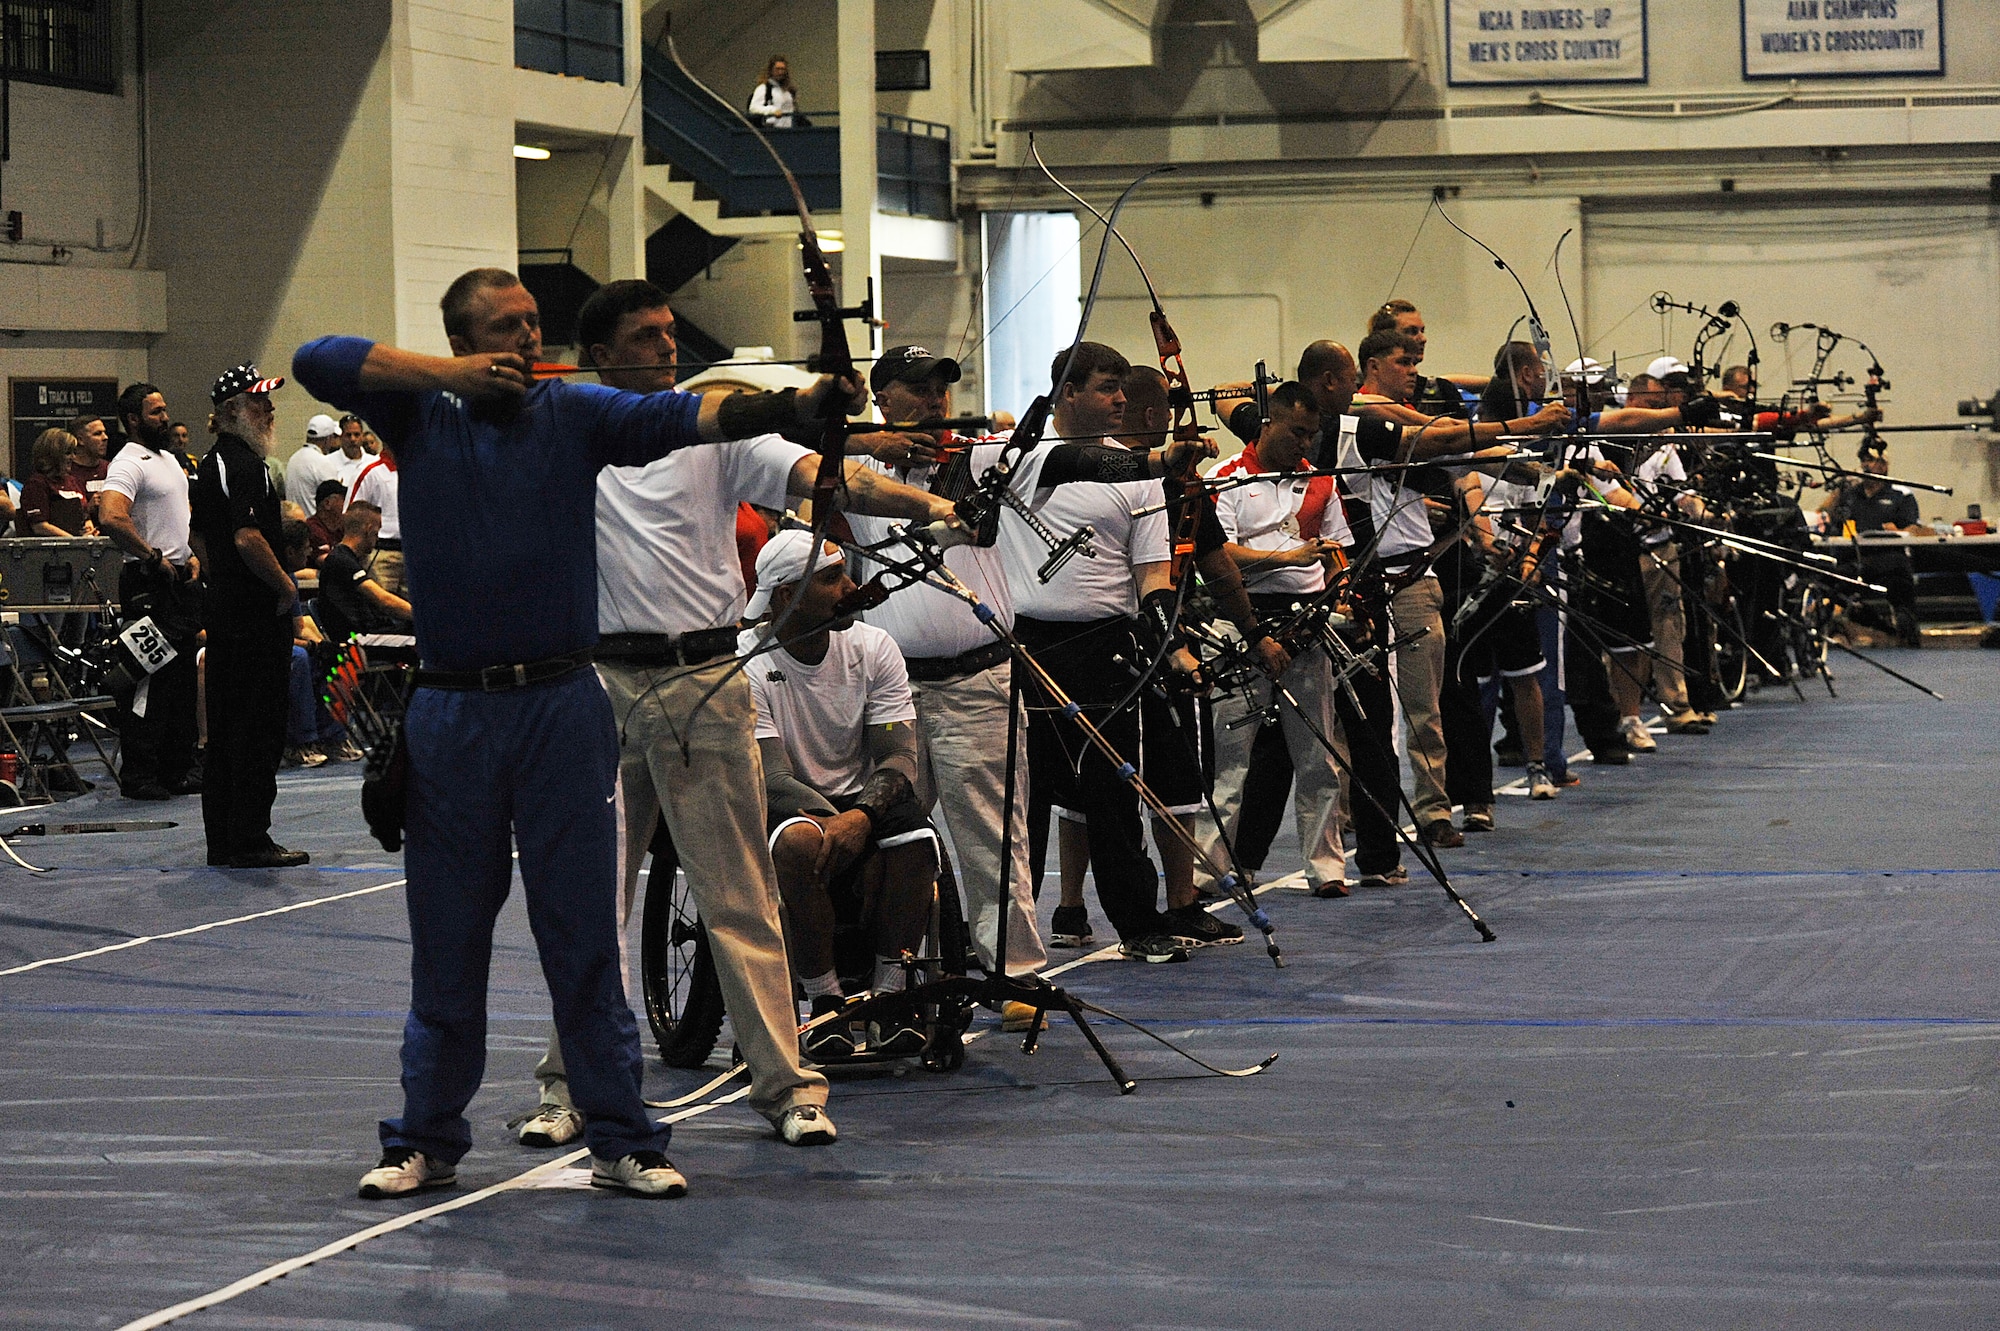 Kendall Madden and other athletes take part in the archery competition of Warrior Games 2012 at the U.S. Air Force Academy in Colorado Springs, Colo., May 2, 2012. Madden is with the Air Force team. (U.S. Air Force photo by Val Gempis) 